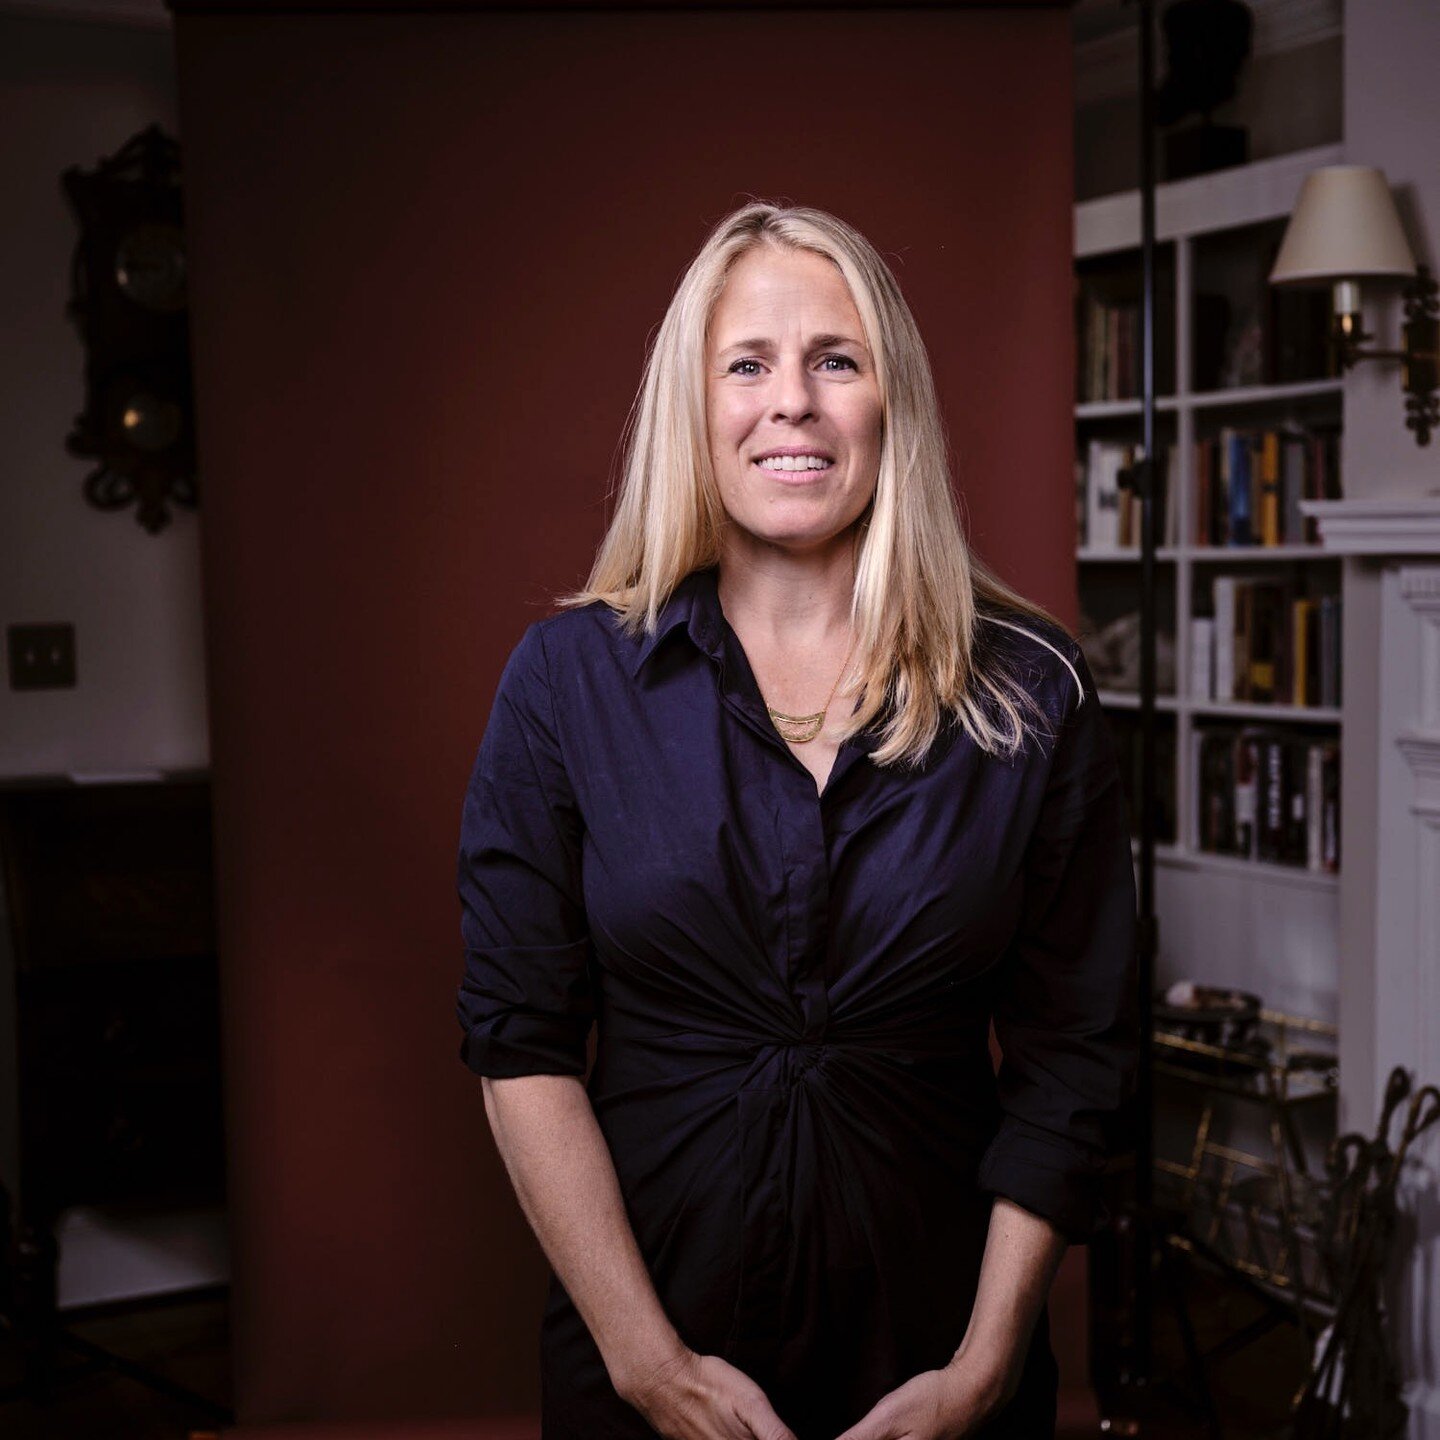 Meet our founder, Lisa Maddox. Former CIA officer who has used her unparalleled research and investigative skills to establish Family History Intelligence. Lisa completes intense research on family backgrounds and digitizes these findings into passwo